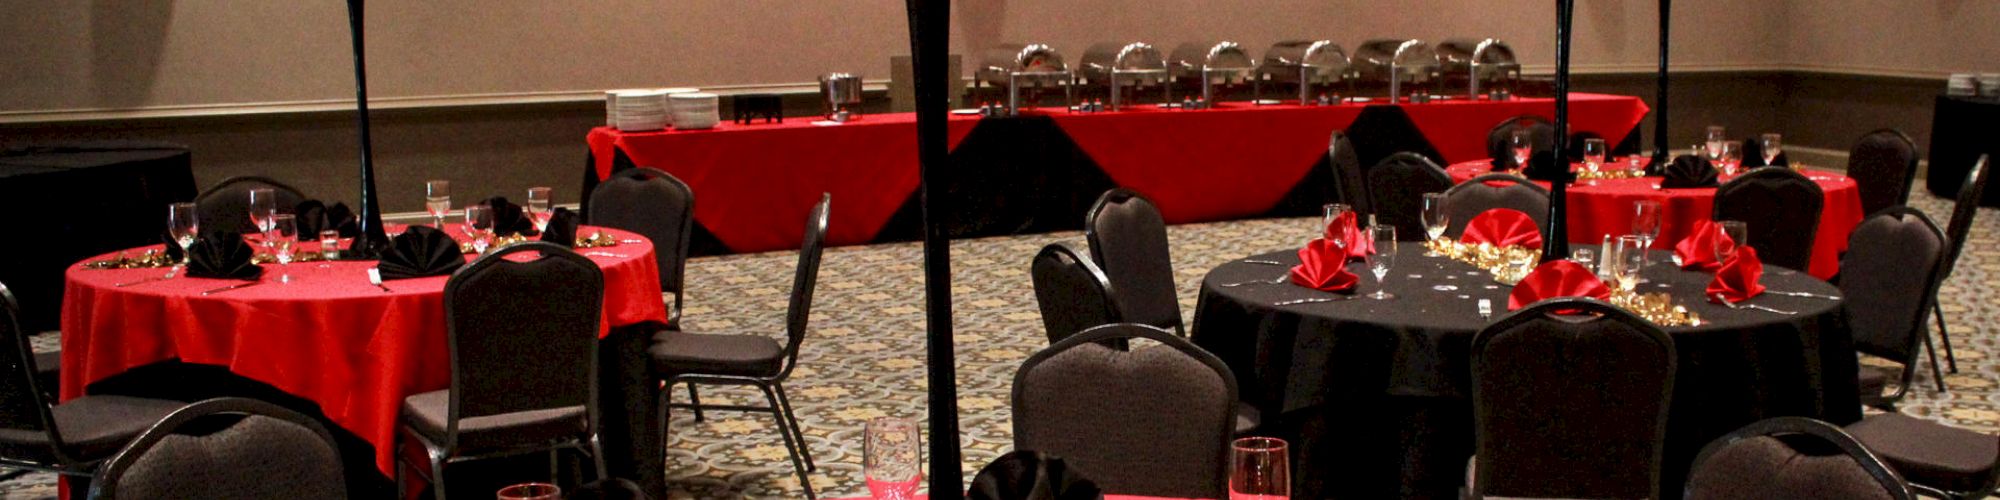 A banquet hall with round tables adorned with red tablecloths, tall red floral centerpieces, and folded black napkins, set for an event.